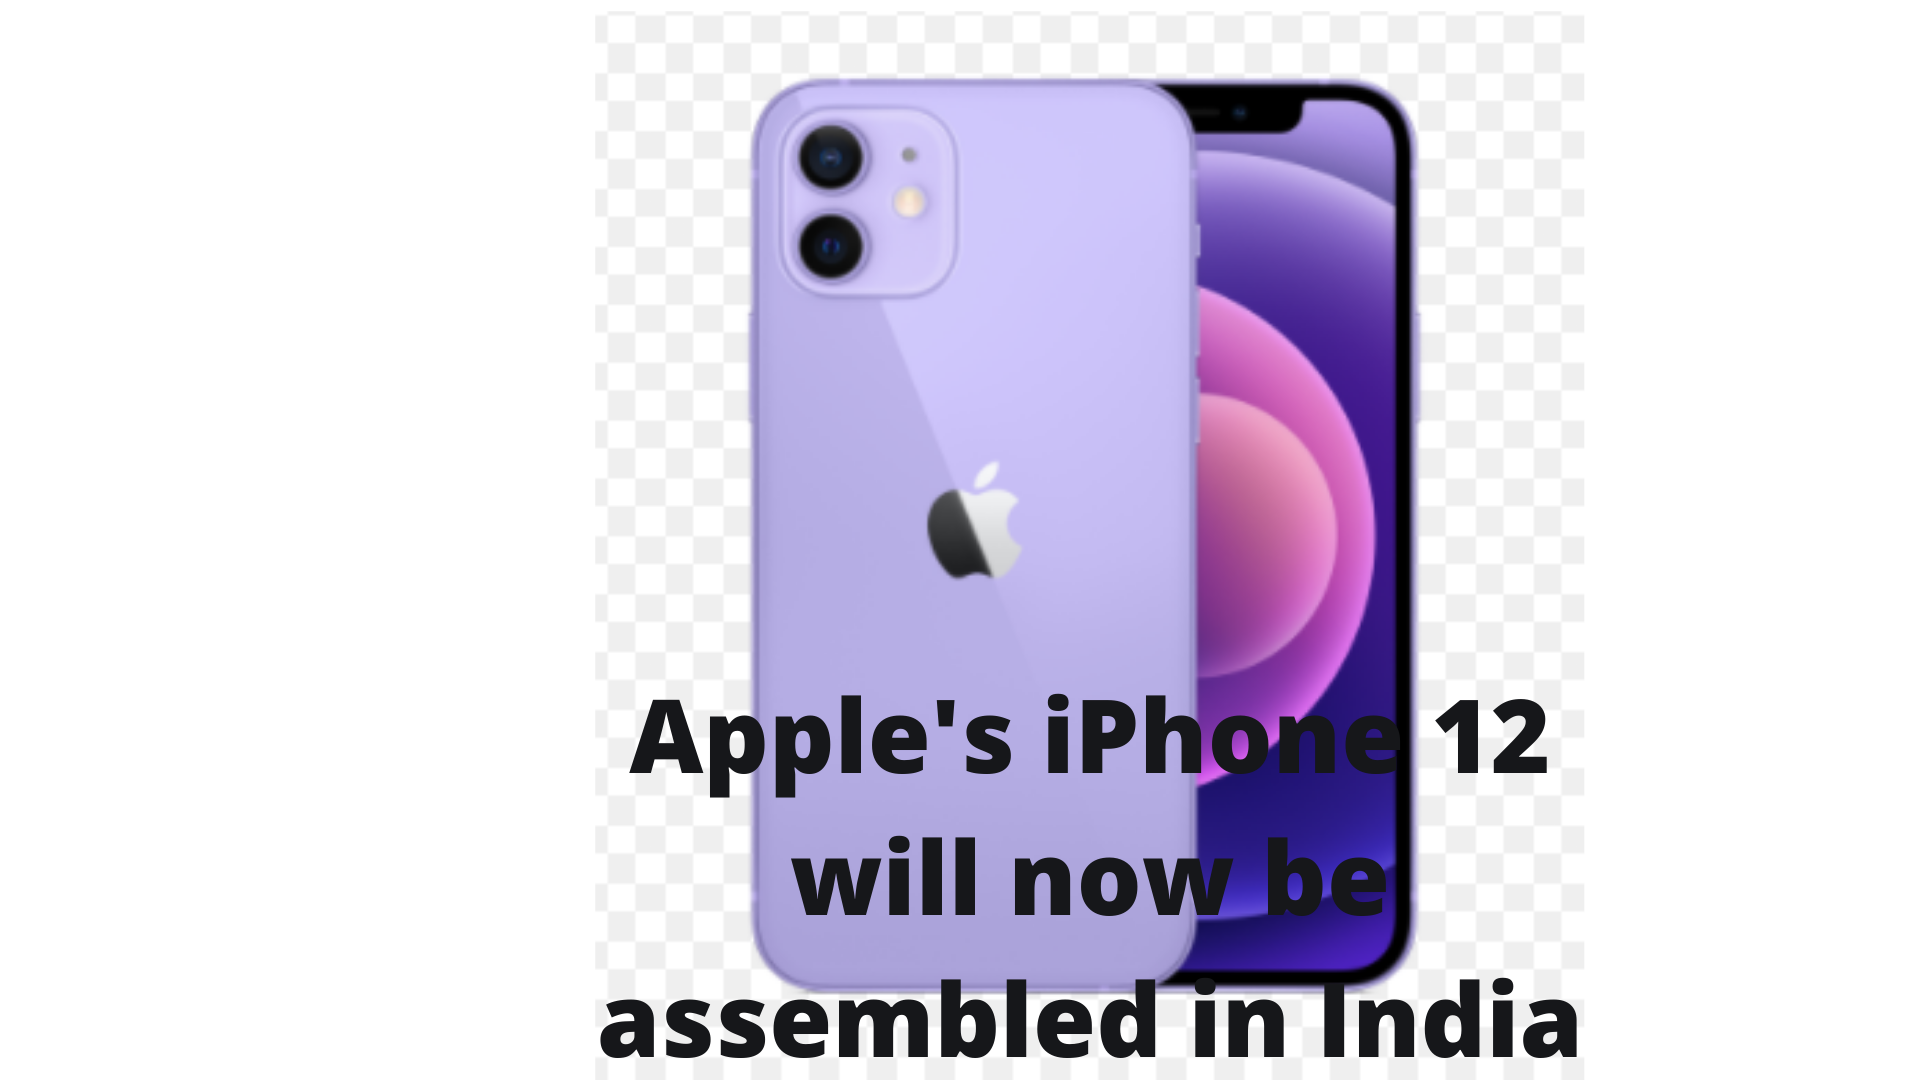 Apple’s iPhone 12 will now be assembled in India